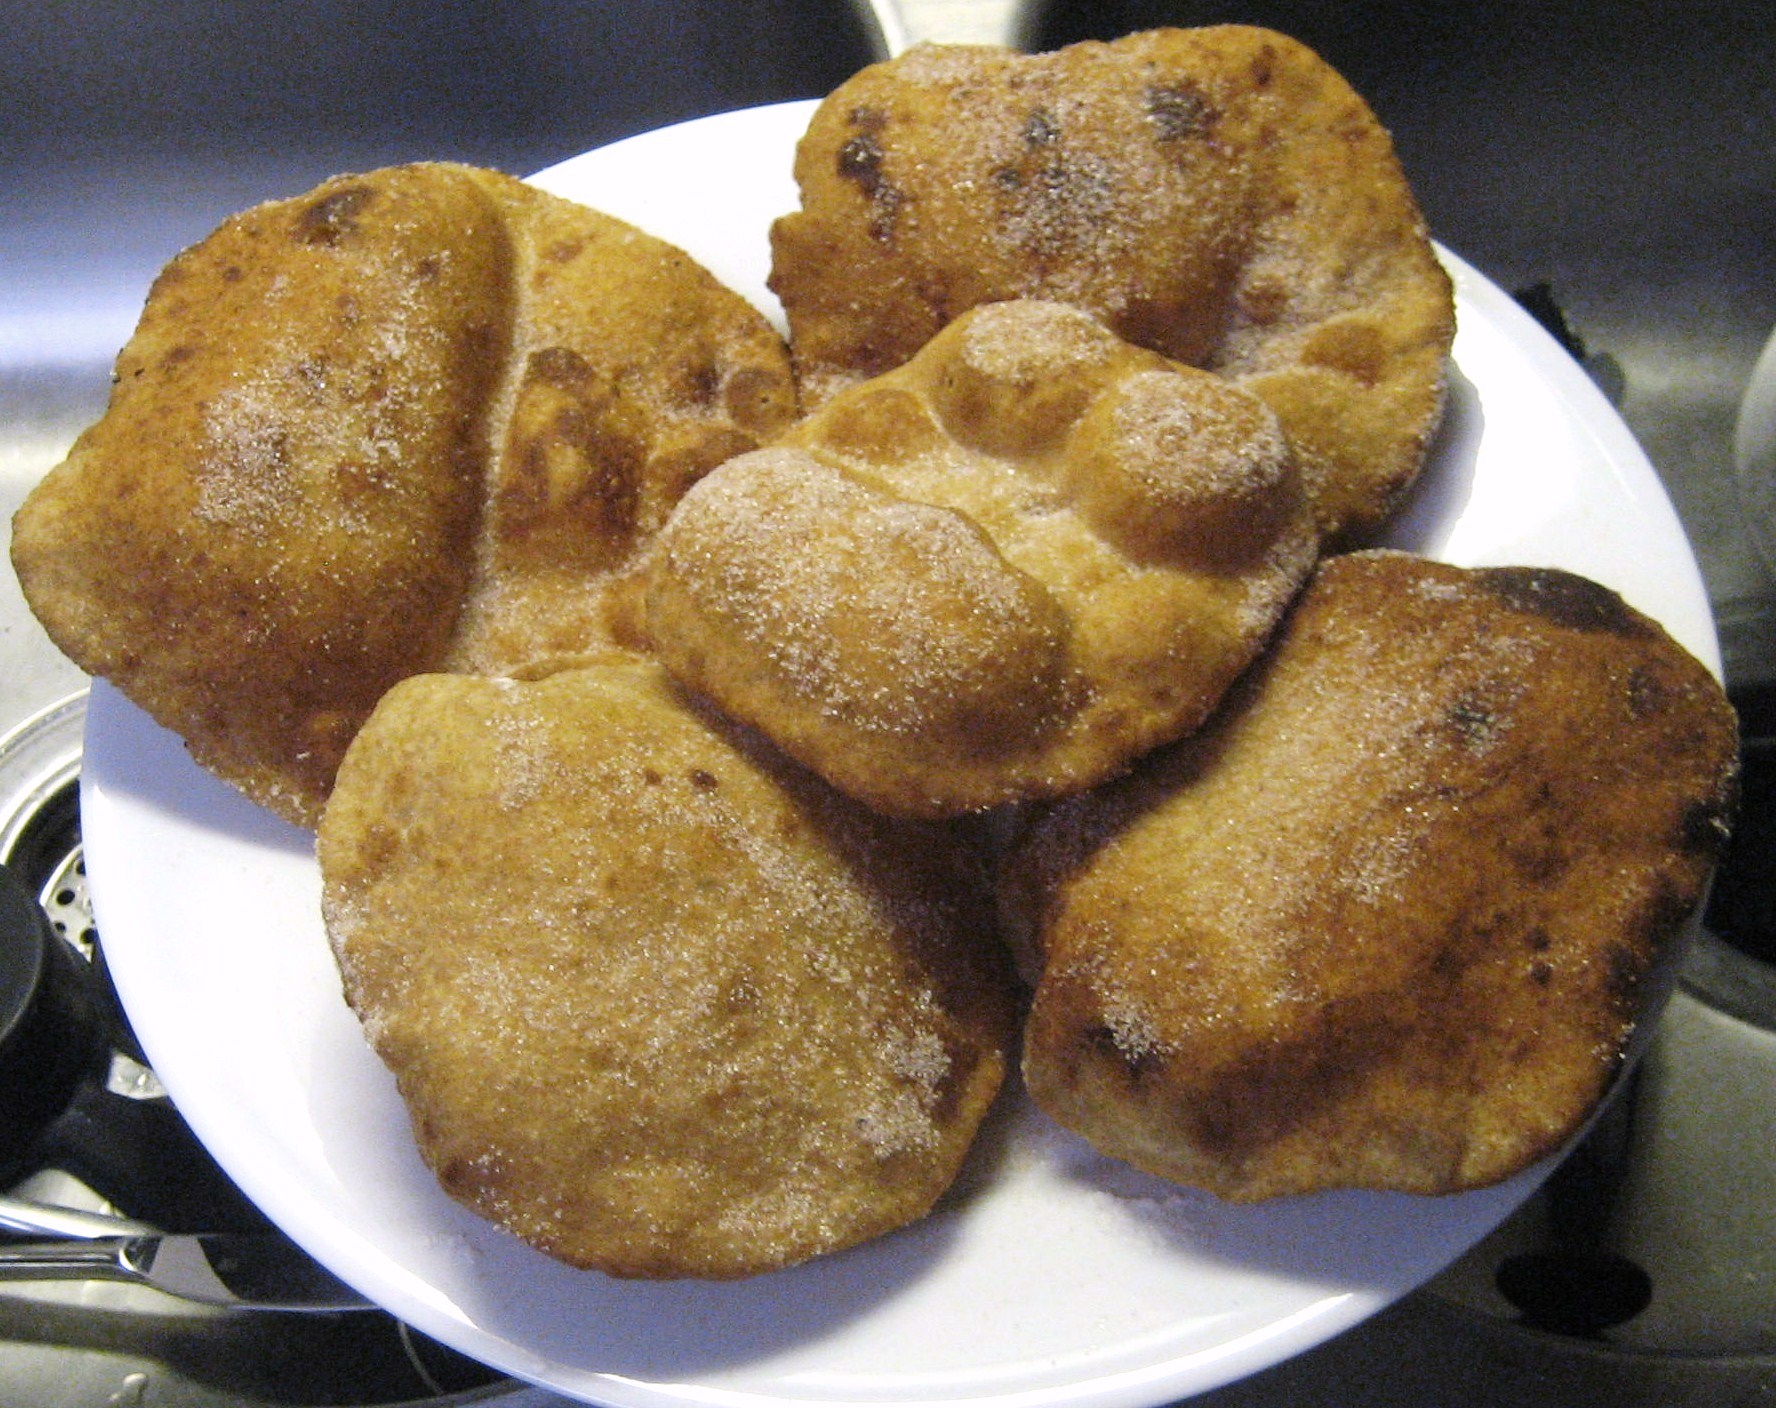 Plate of fry bread.